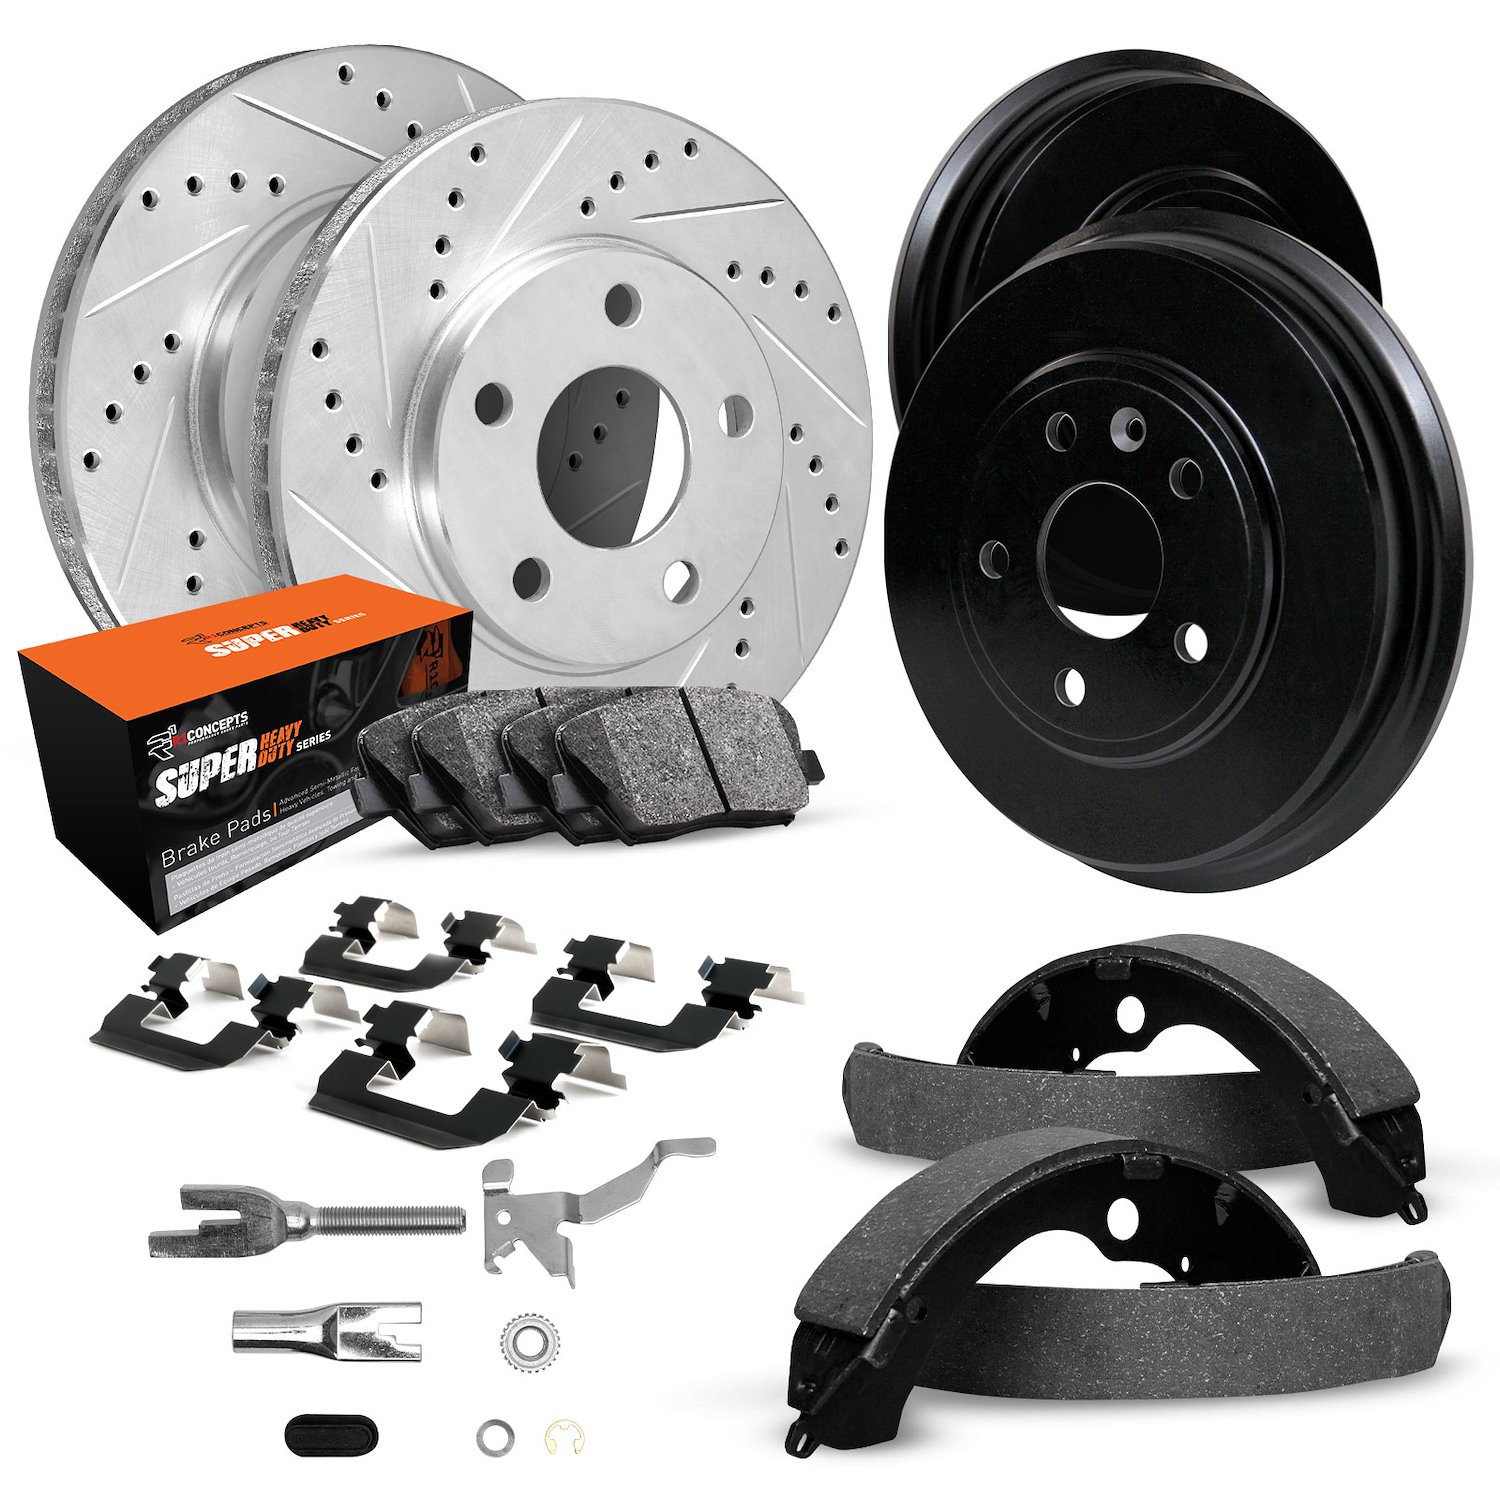 E-Line Drilled/Slotted Silver Rotor & Drum Set w/Super-Duty Pads, Shoes/Hardware/Adjusters, 1984-1989 Mopar